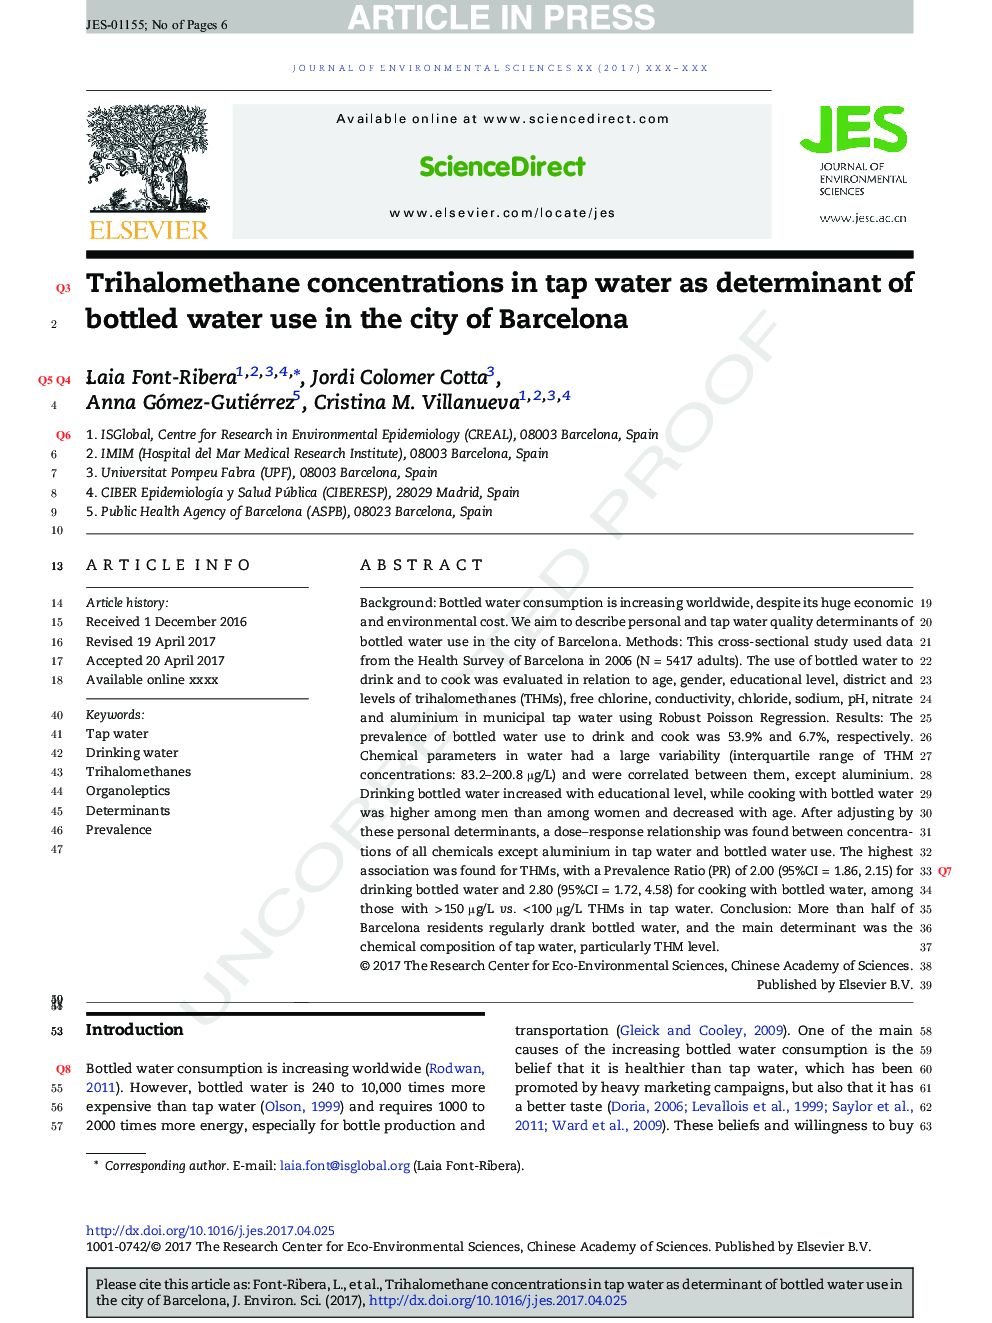 Trihalomethane concentrations in tap water as determinant of bottled water use in the city of Barcelona